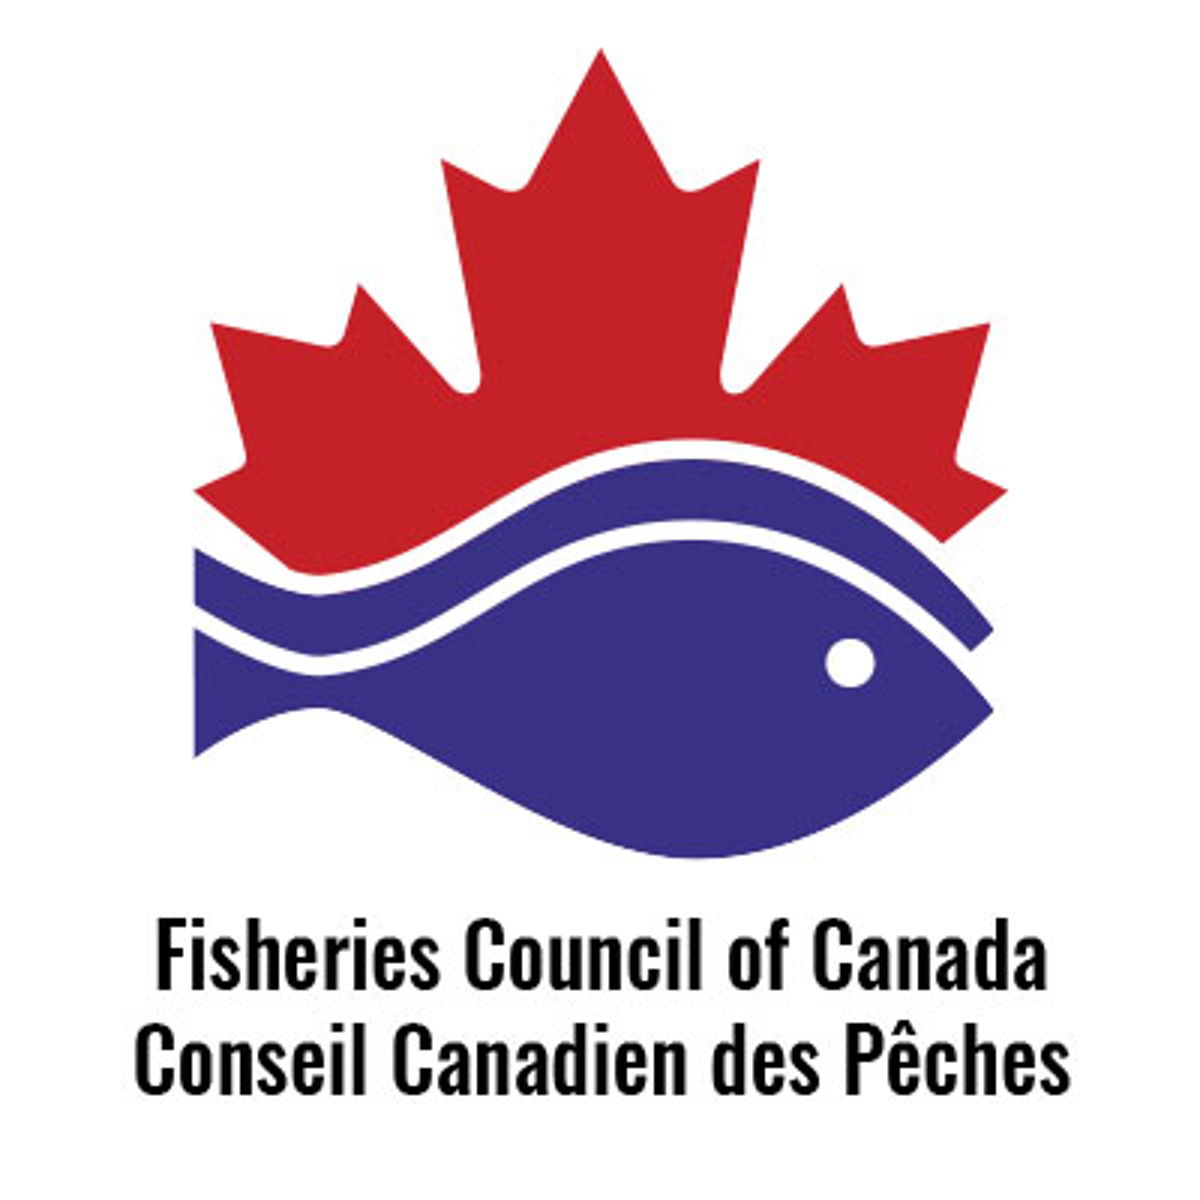 Fisheries Council of Canada Launches New Website